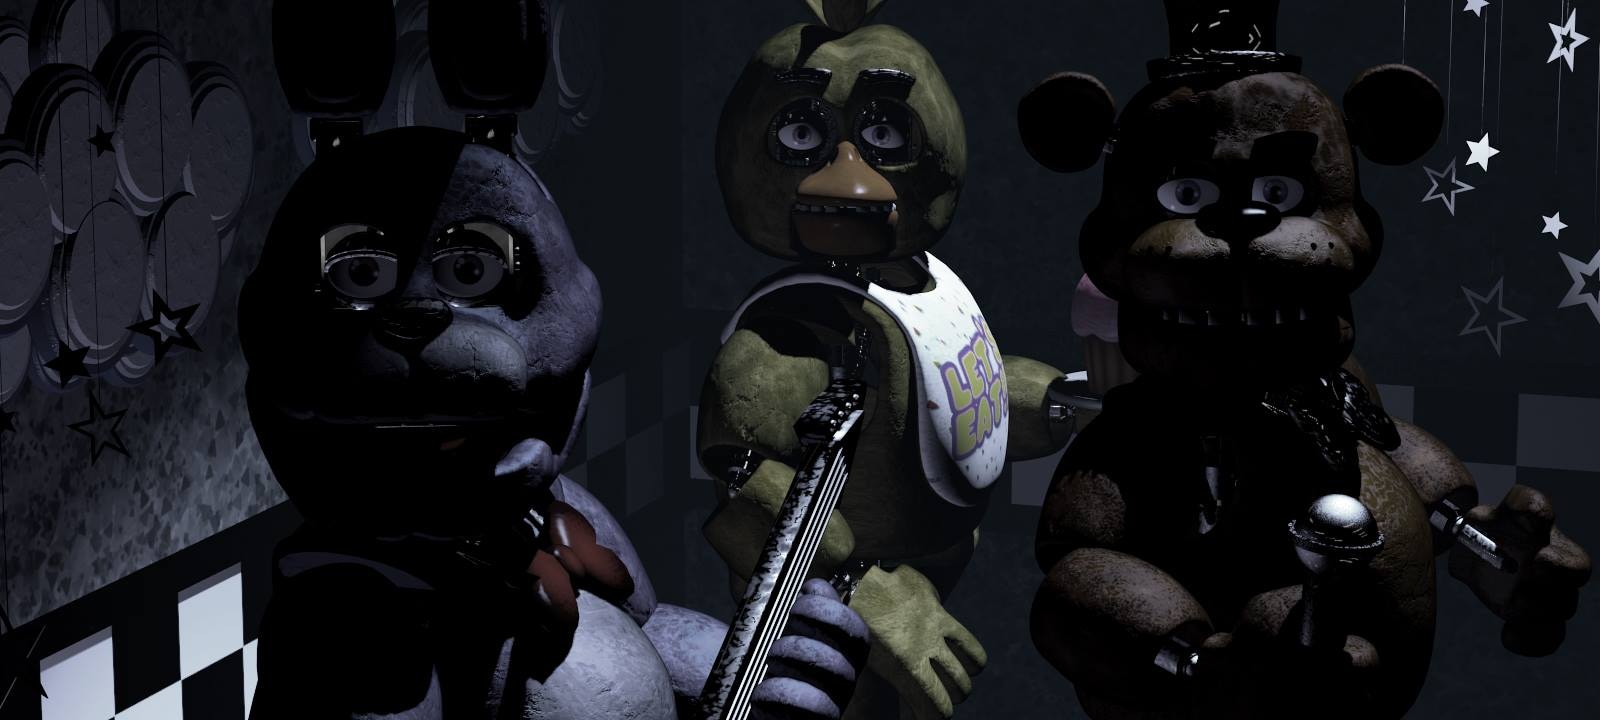 The Marionette~*, Fnaf 1-6 role play! (Anime style FNaF)